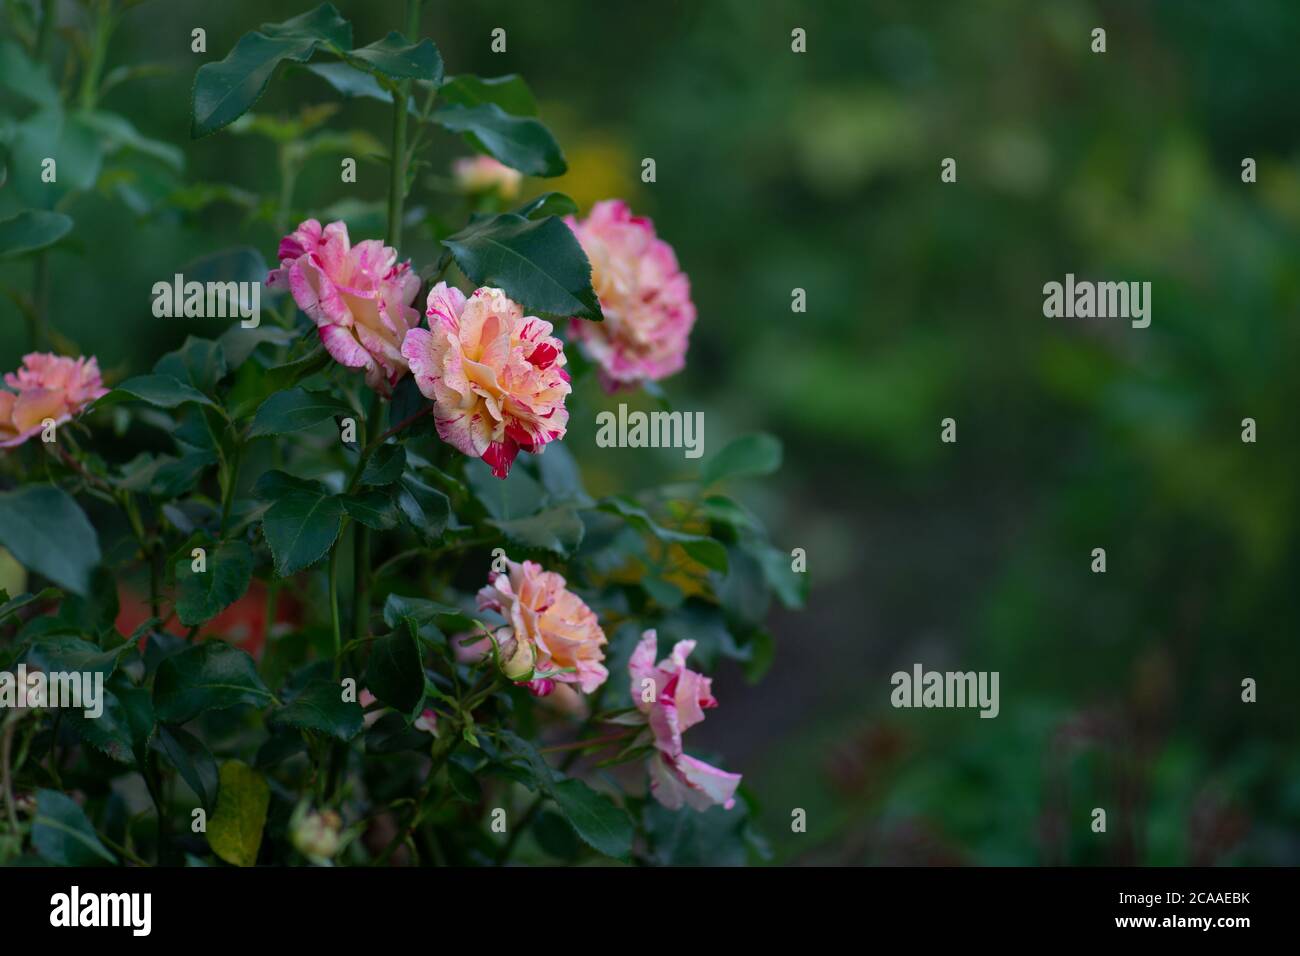 Pink and white striped roses in the garden. Pink and white striped roses Stock Photo